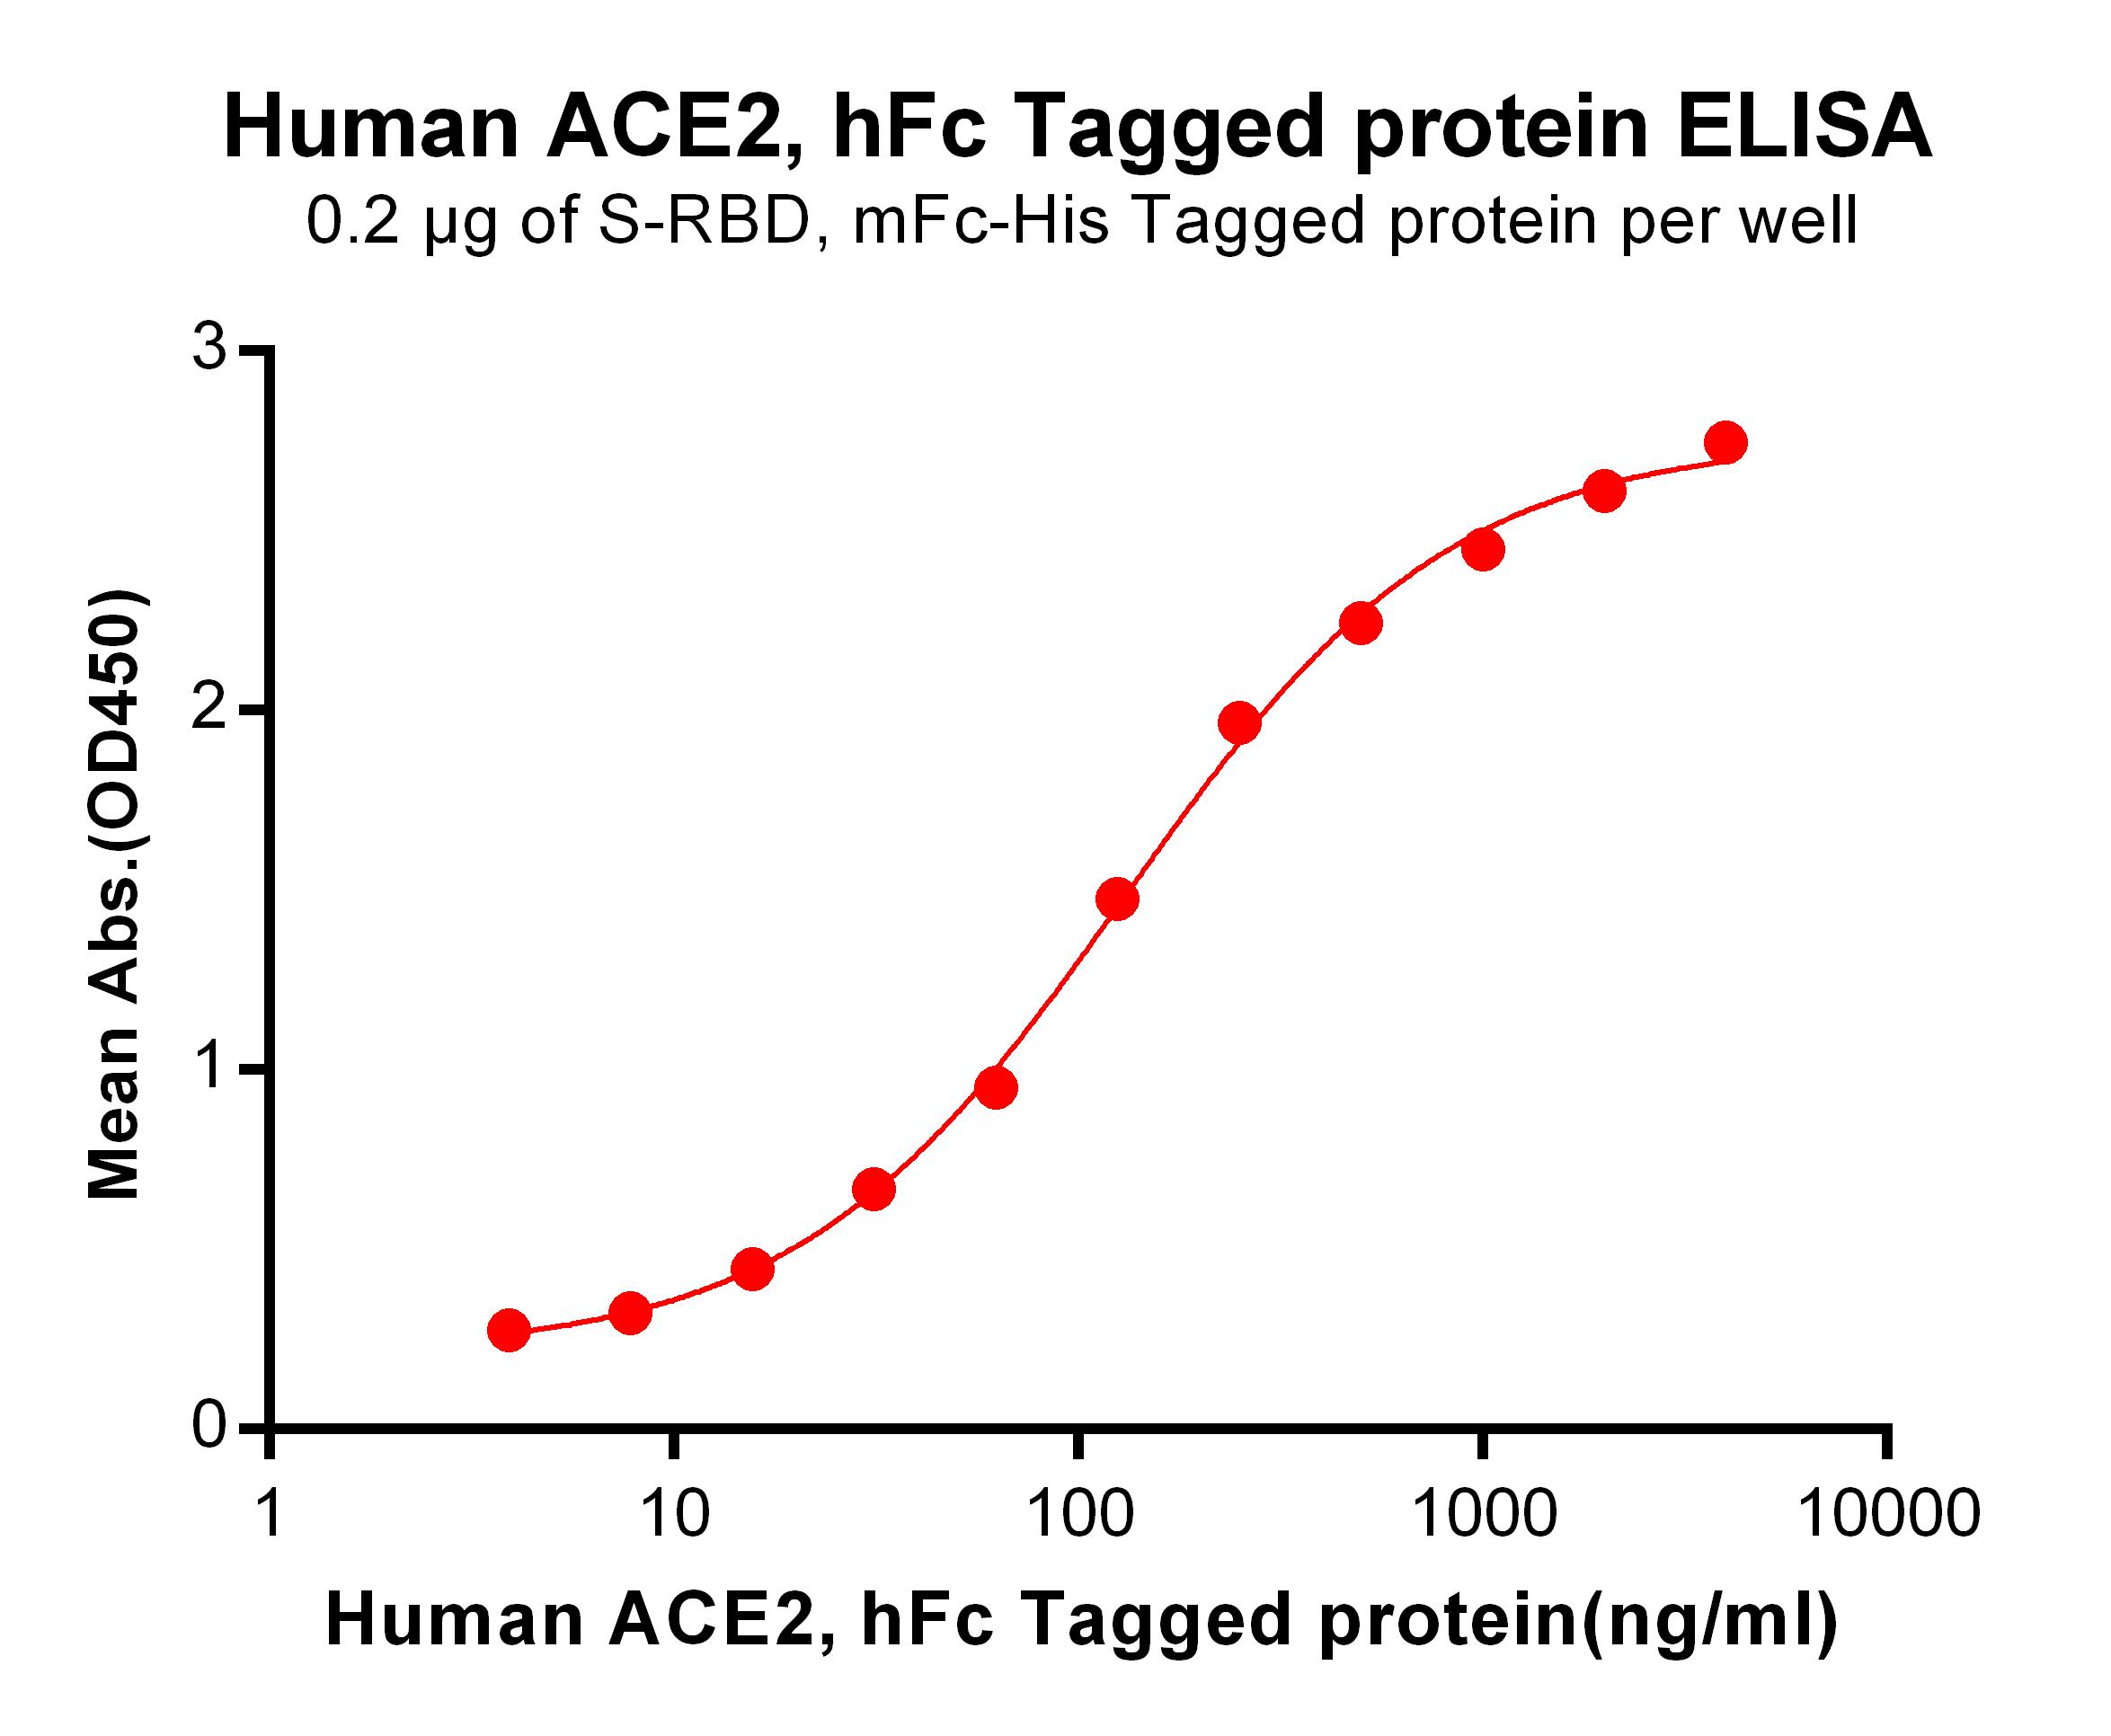 Figure 2. ELISA plate pre-coated by 2 µg/ml (100 µl/well) S-RBD, mFc-His tagged protein can bind Human ACE2, hFc Tagged protein in a linear range of 0.488-49.83 ng/ml.